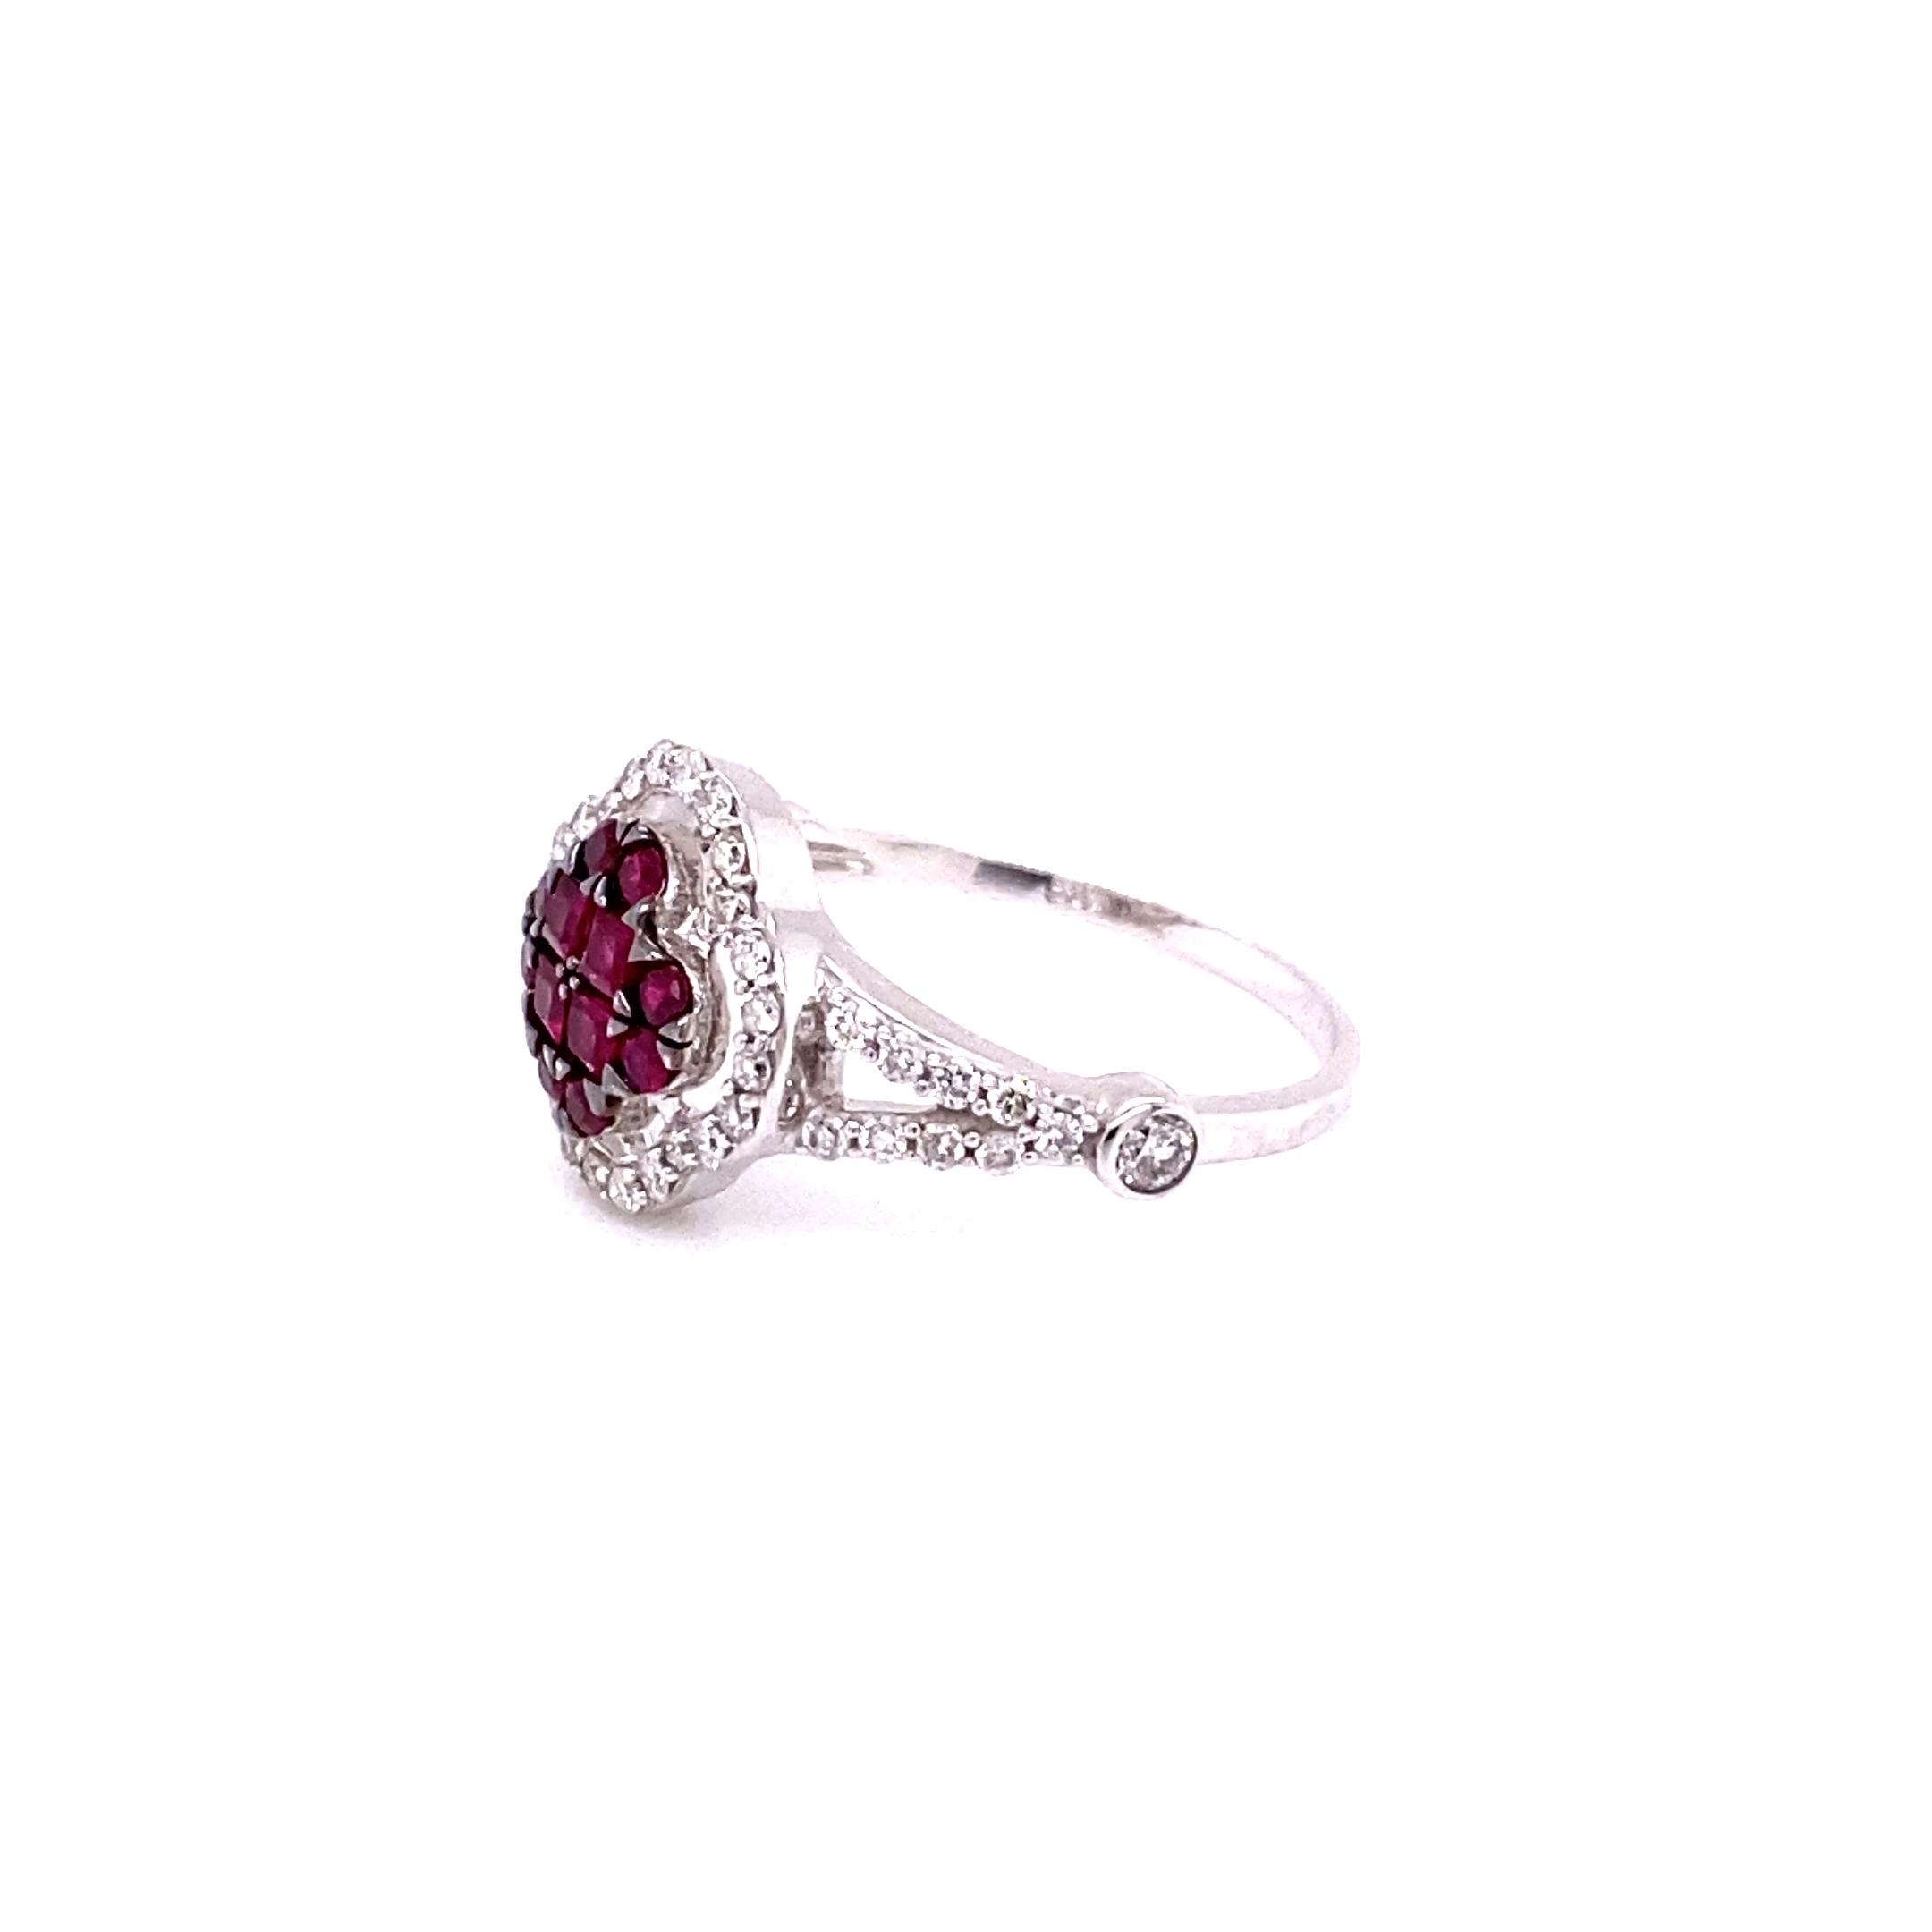 14KW Rubies With A Halo and Accent Diamonds Fashion Ring